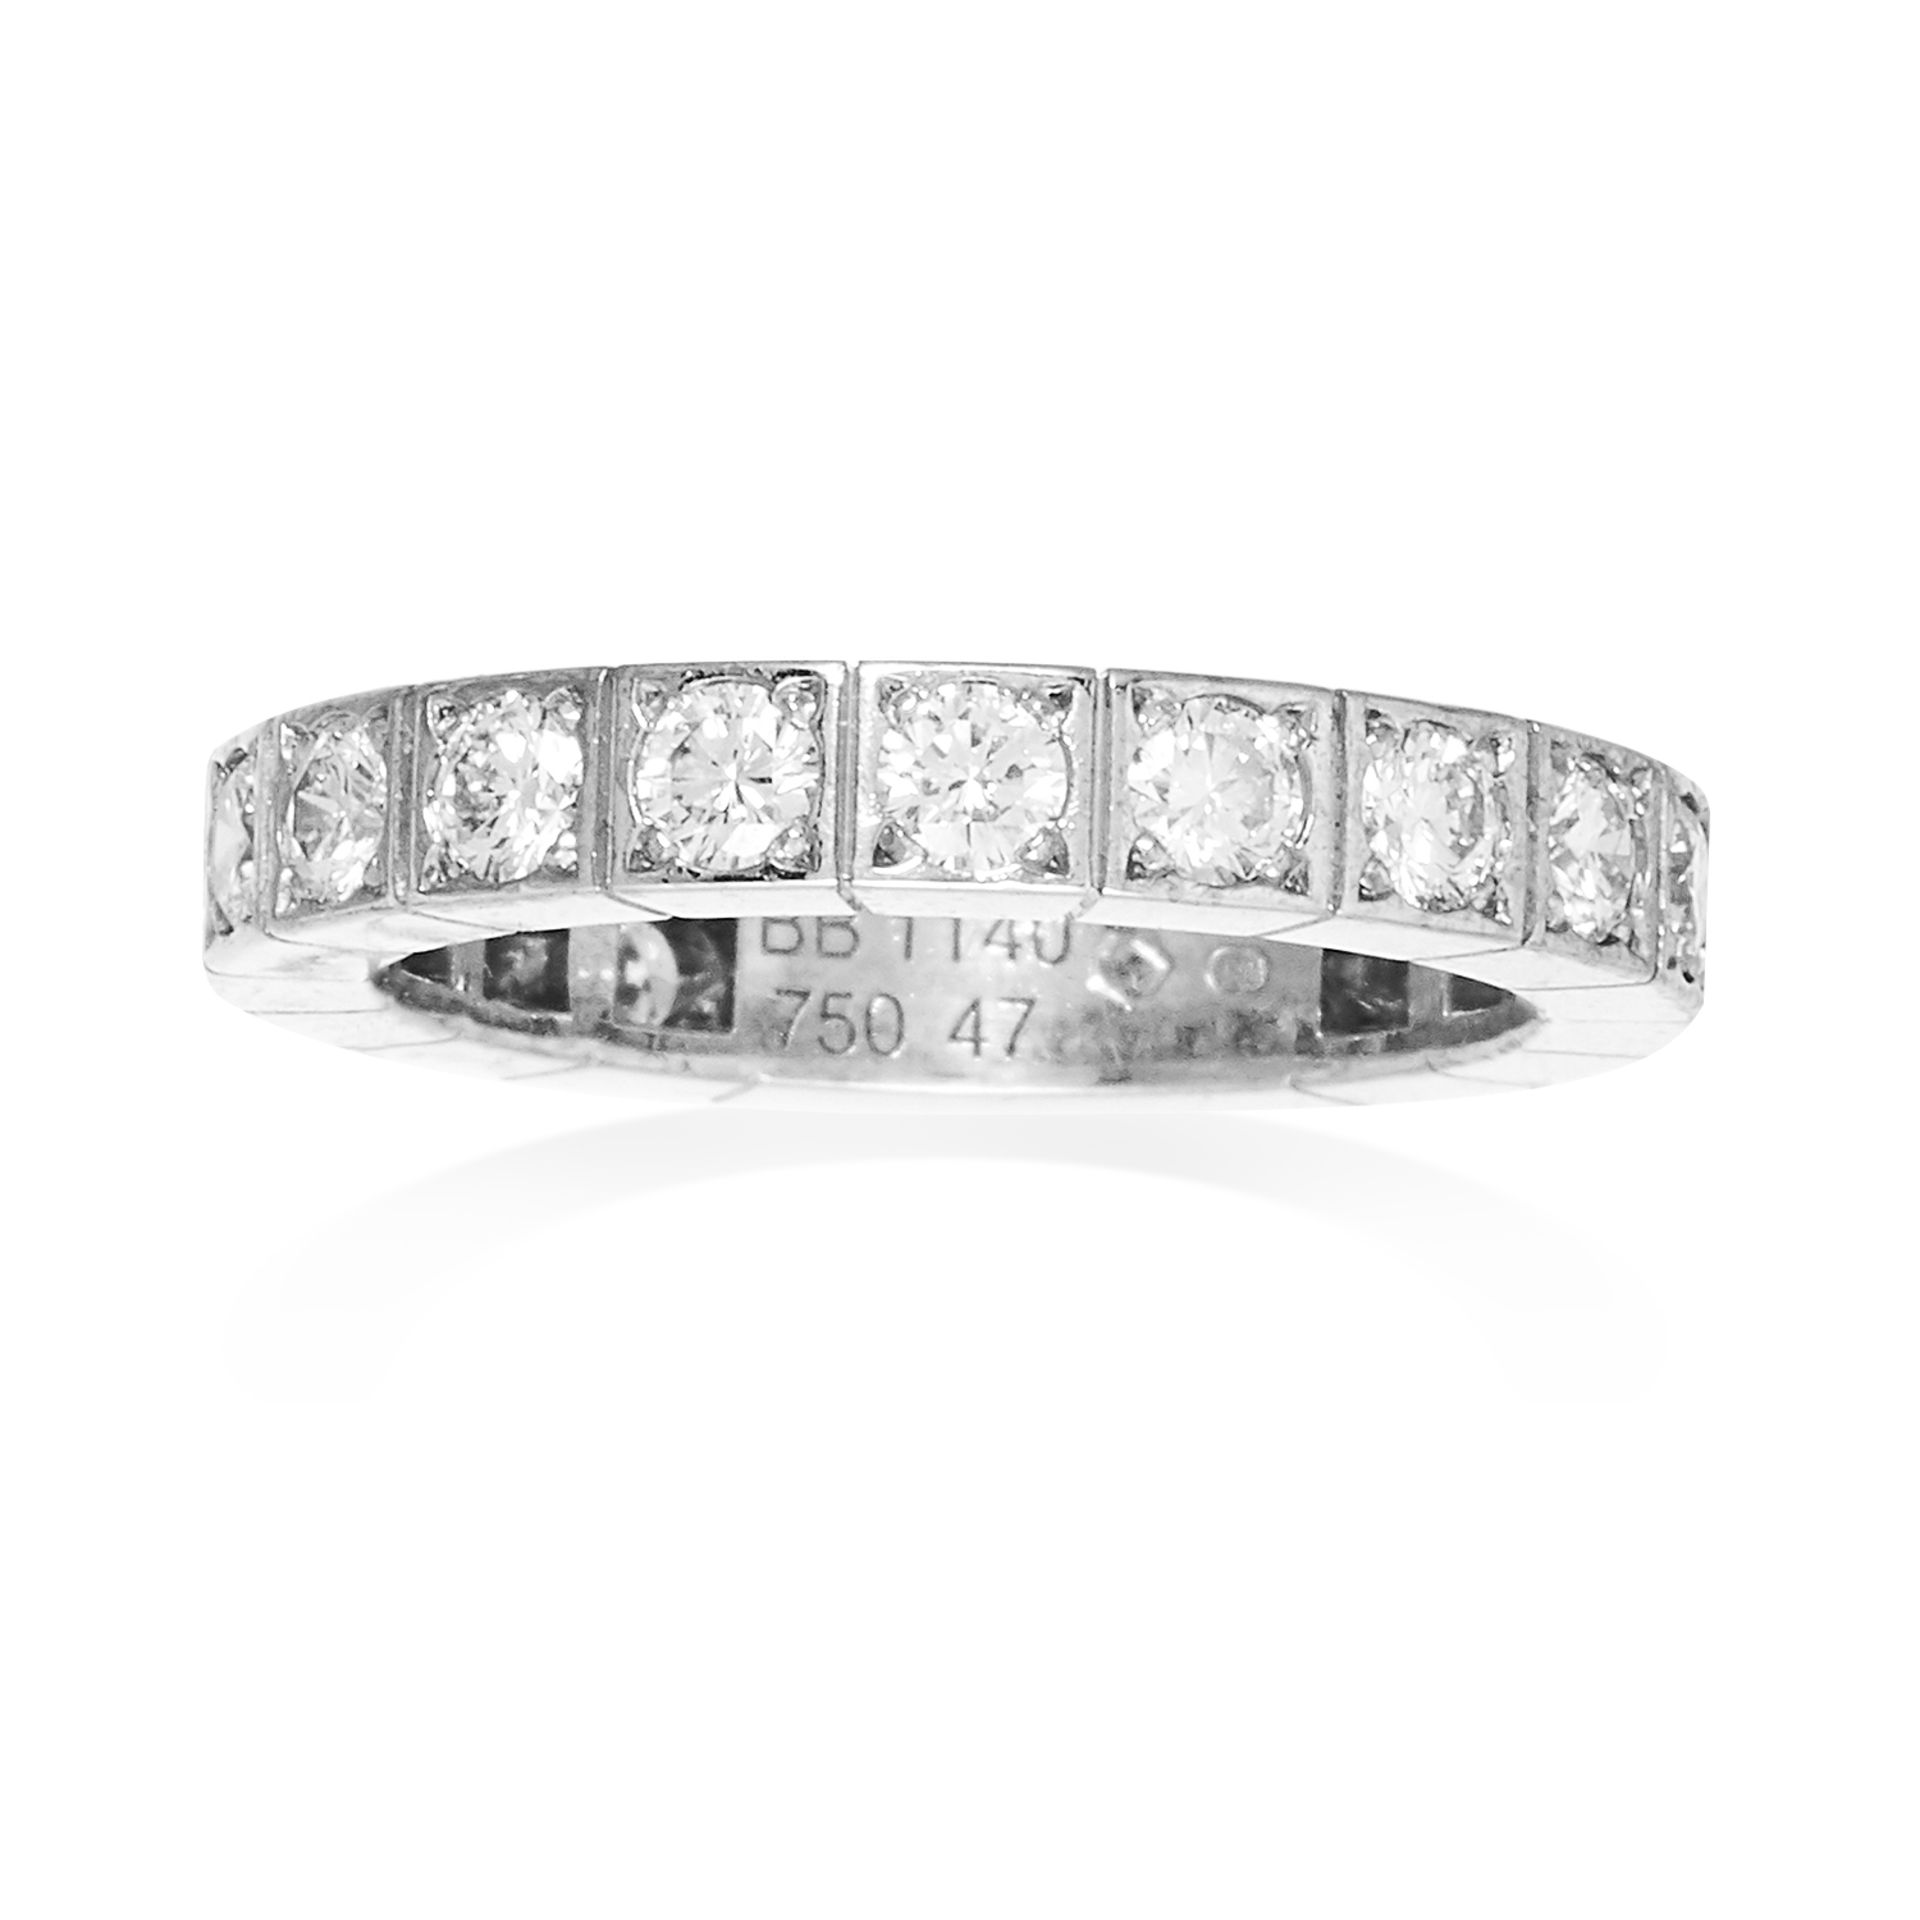 A DIAMOND ETERNITY RING, CARTIER in 18ct white gold, set with a single row of diamonds totalling 1.0